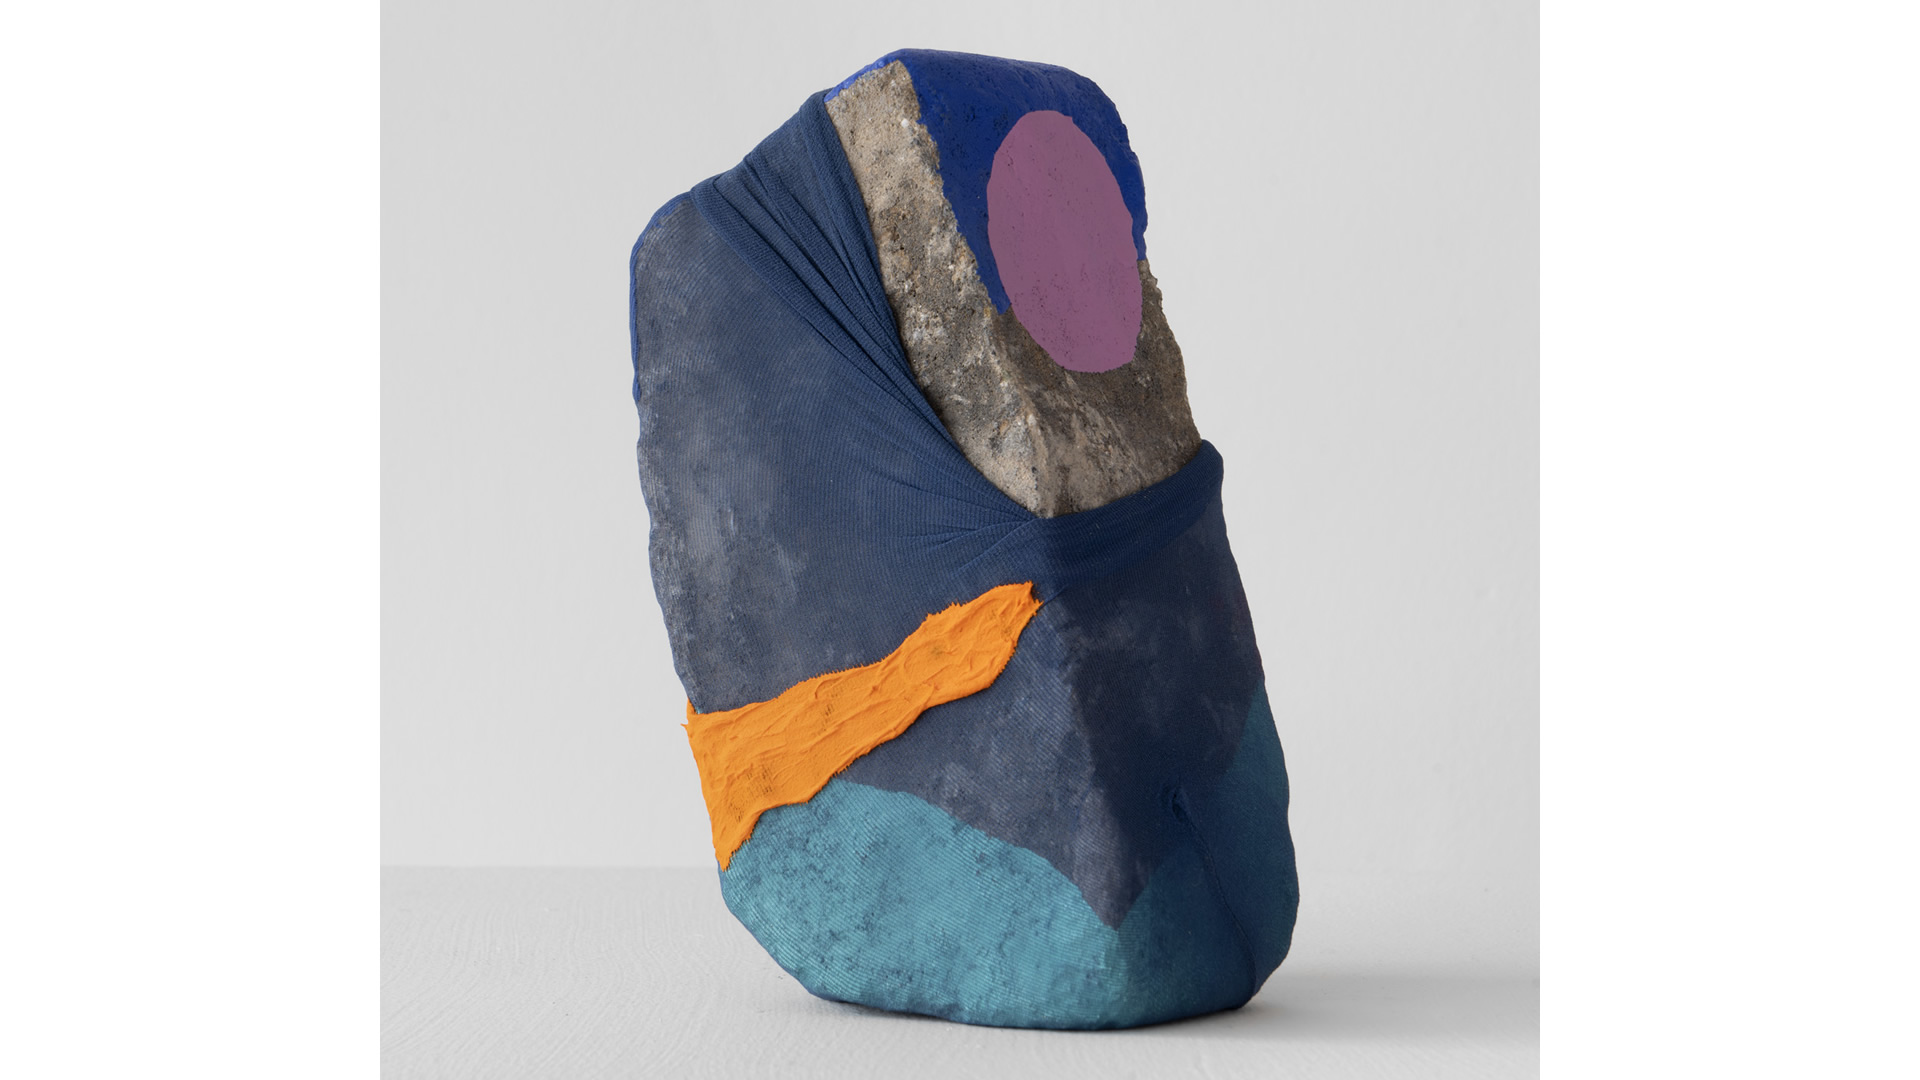 A sculpture in the form of a rock. Painted gray and covered in nylon with geometric shapes in a variety of colors.